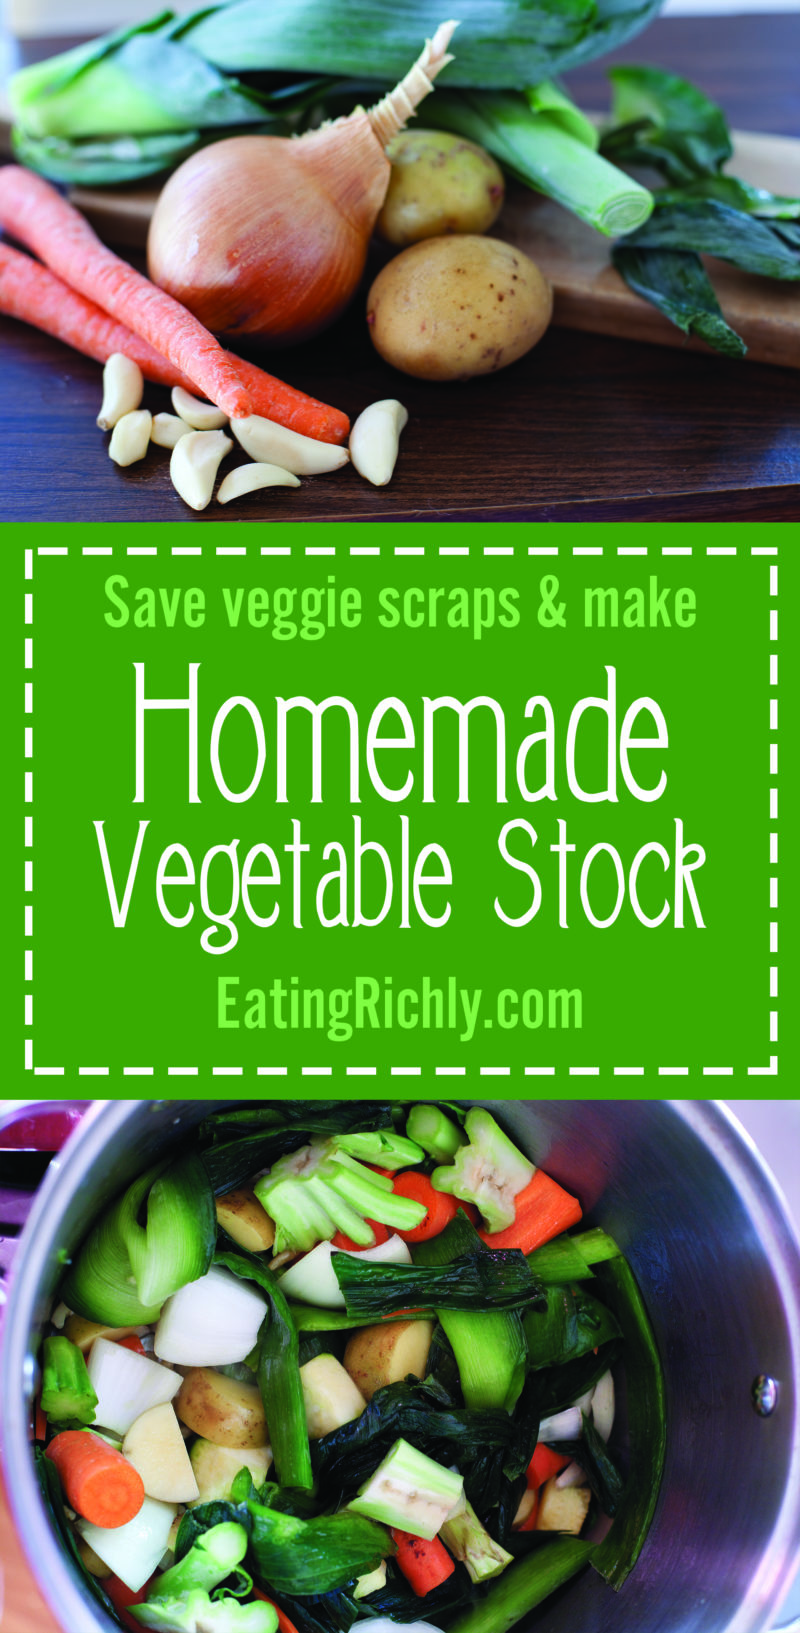 This homemade vegetable stock recipe can save you so much money by using veggie scraps stored in the freezer. From EatingRichly.com